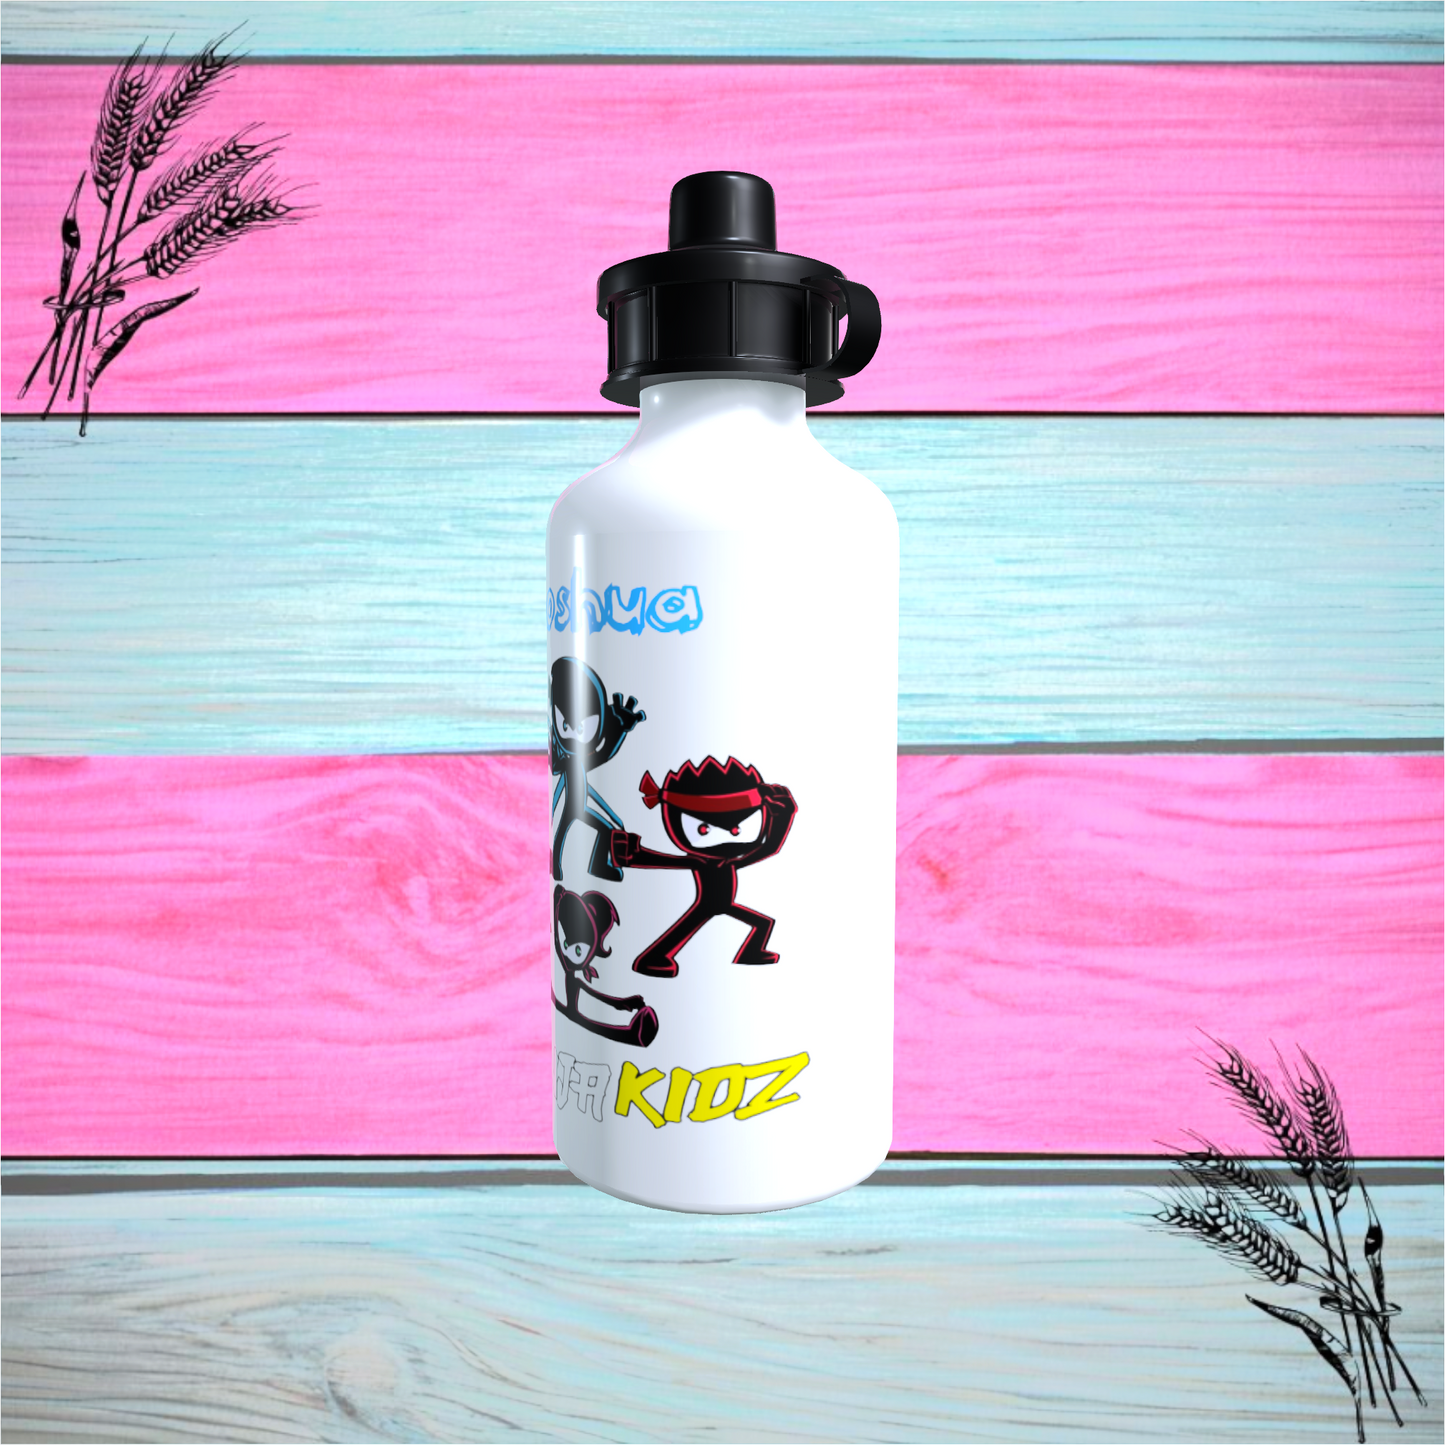 Printed 600ml Ninja Kidz Aluminium Water Bottle, Any Name, Available In White Or Silver